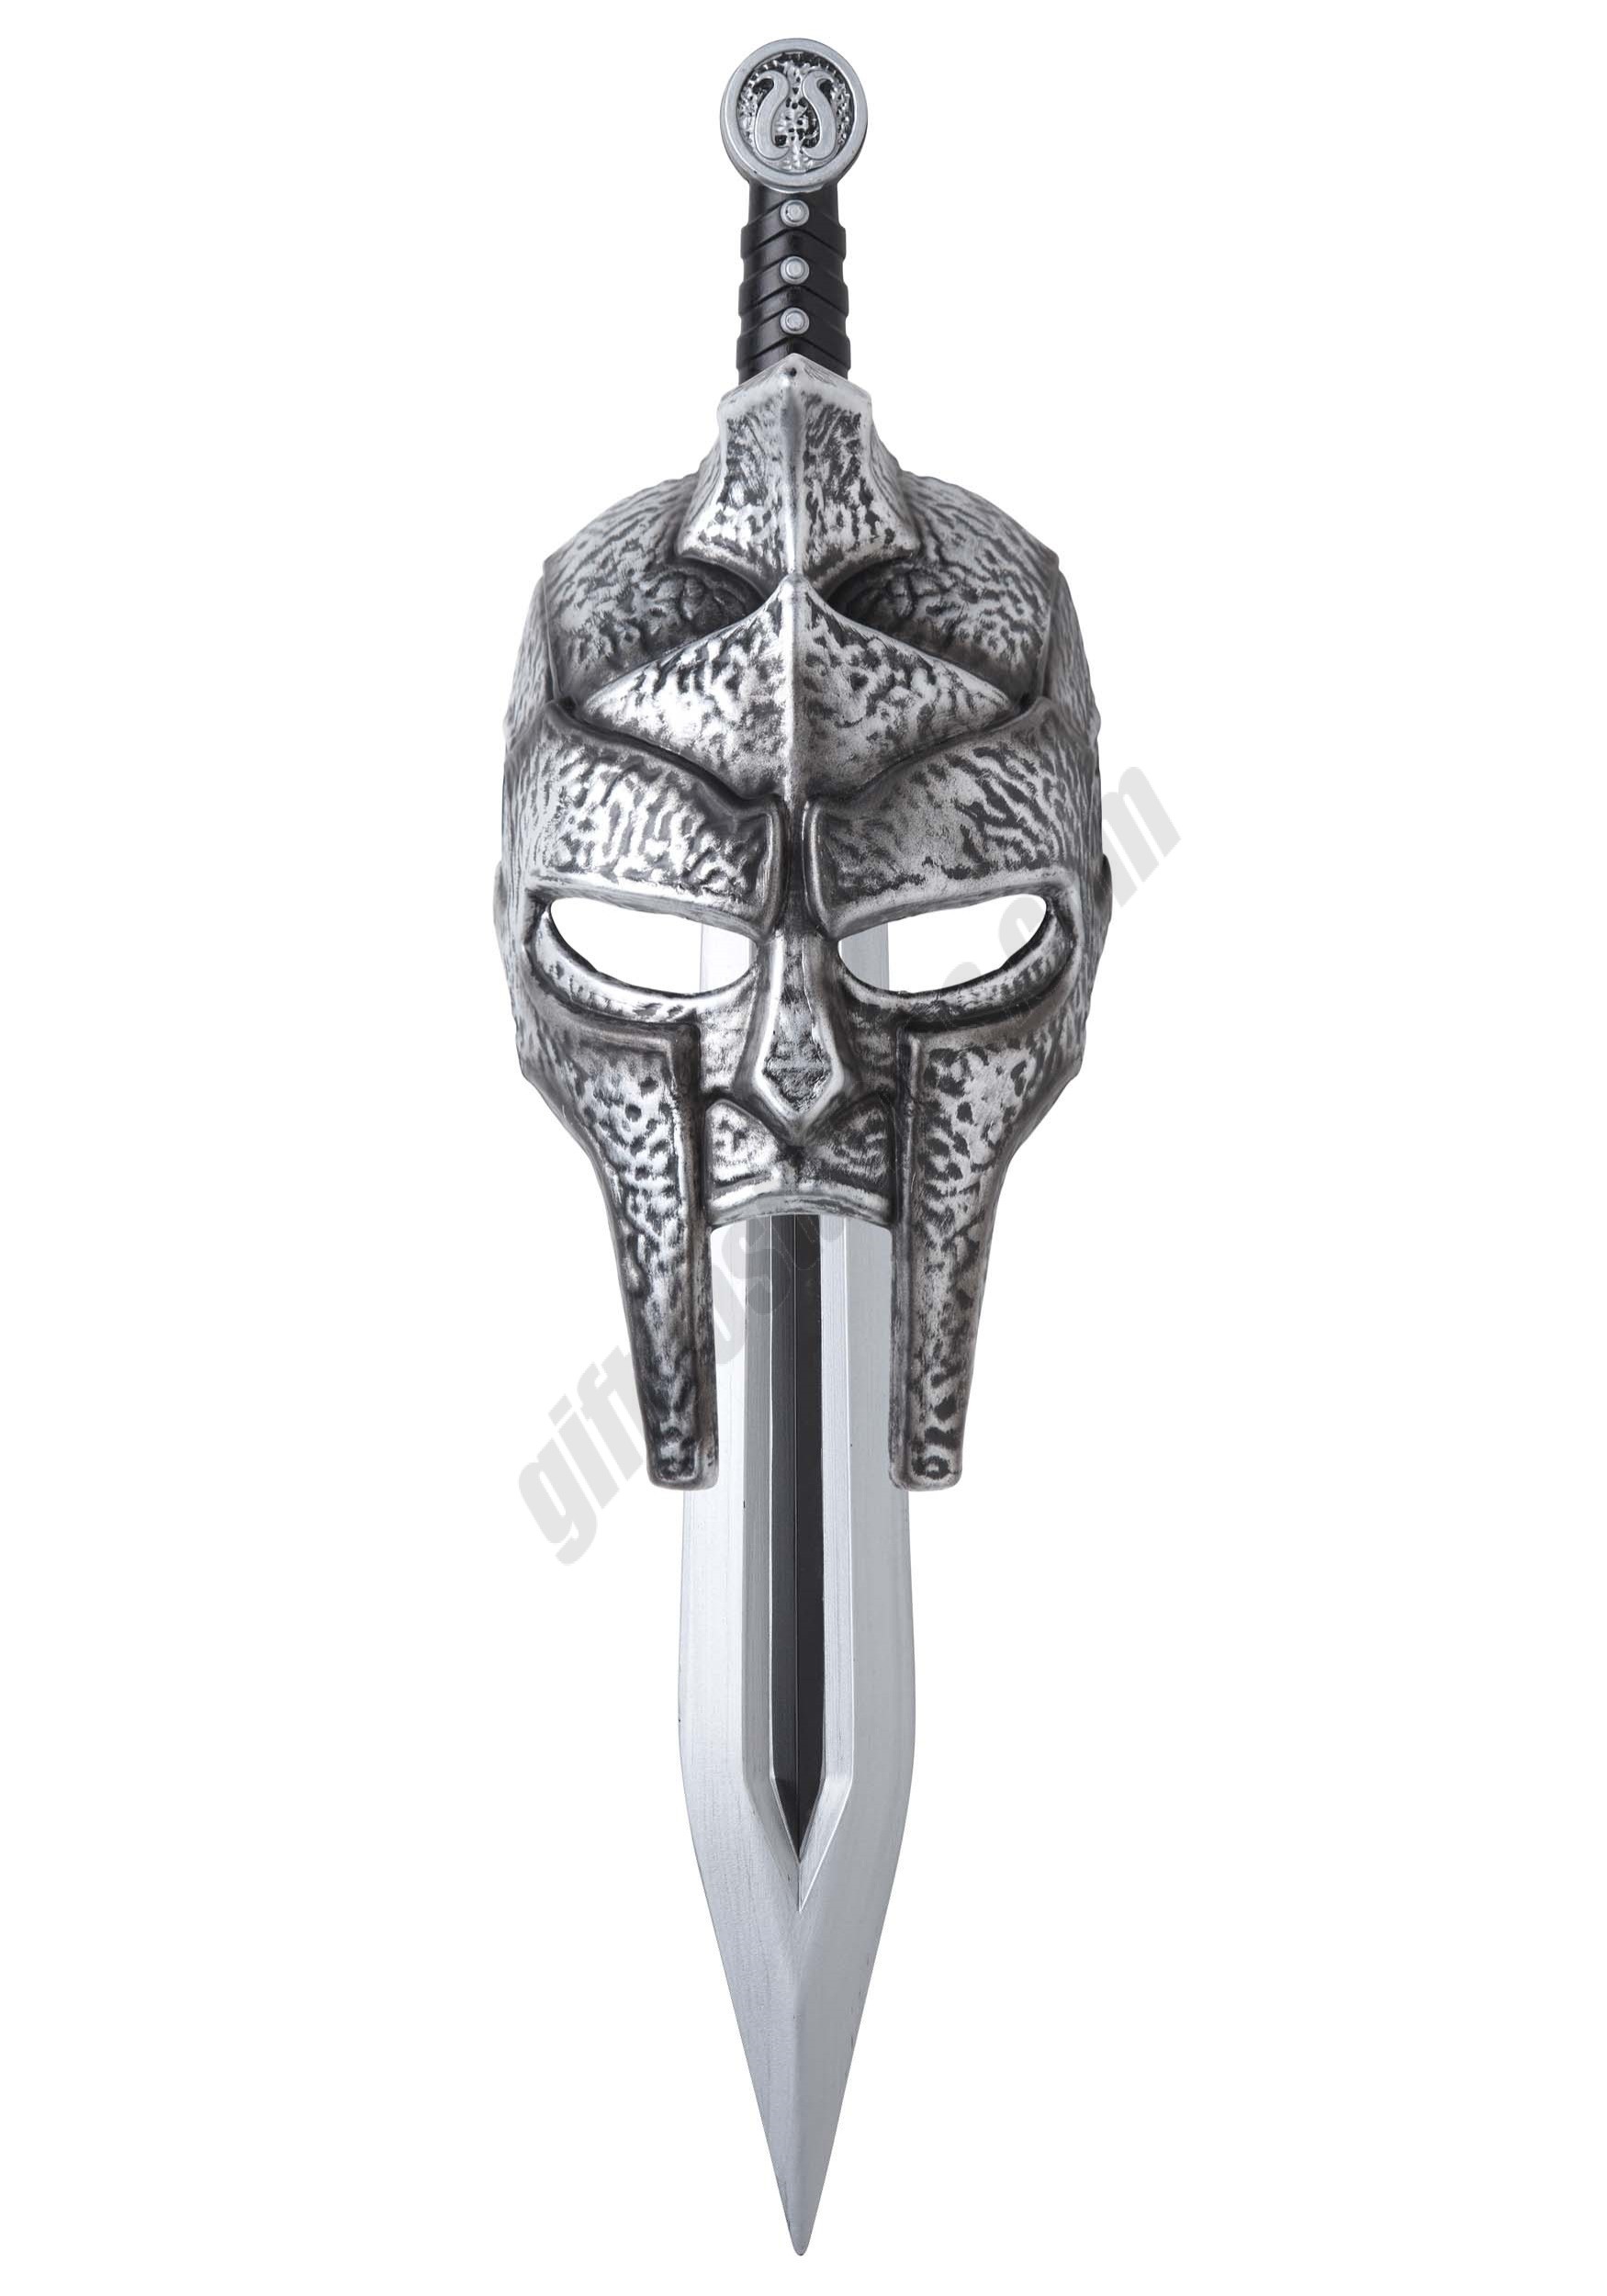 Kid's Gladiator Mask and Sword Promotions - Kid's Gladiator Mask and Sword Promotions